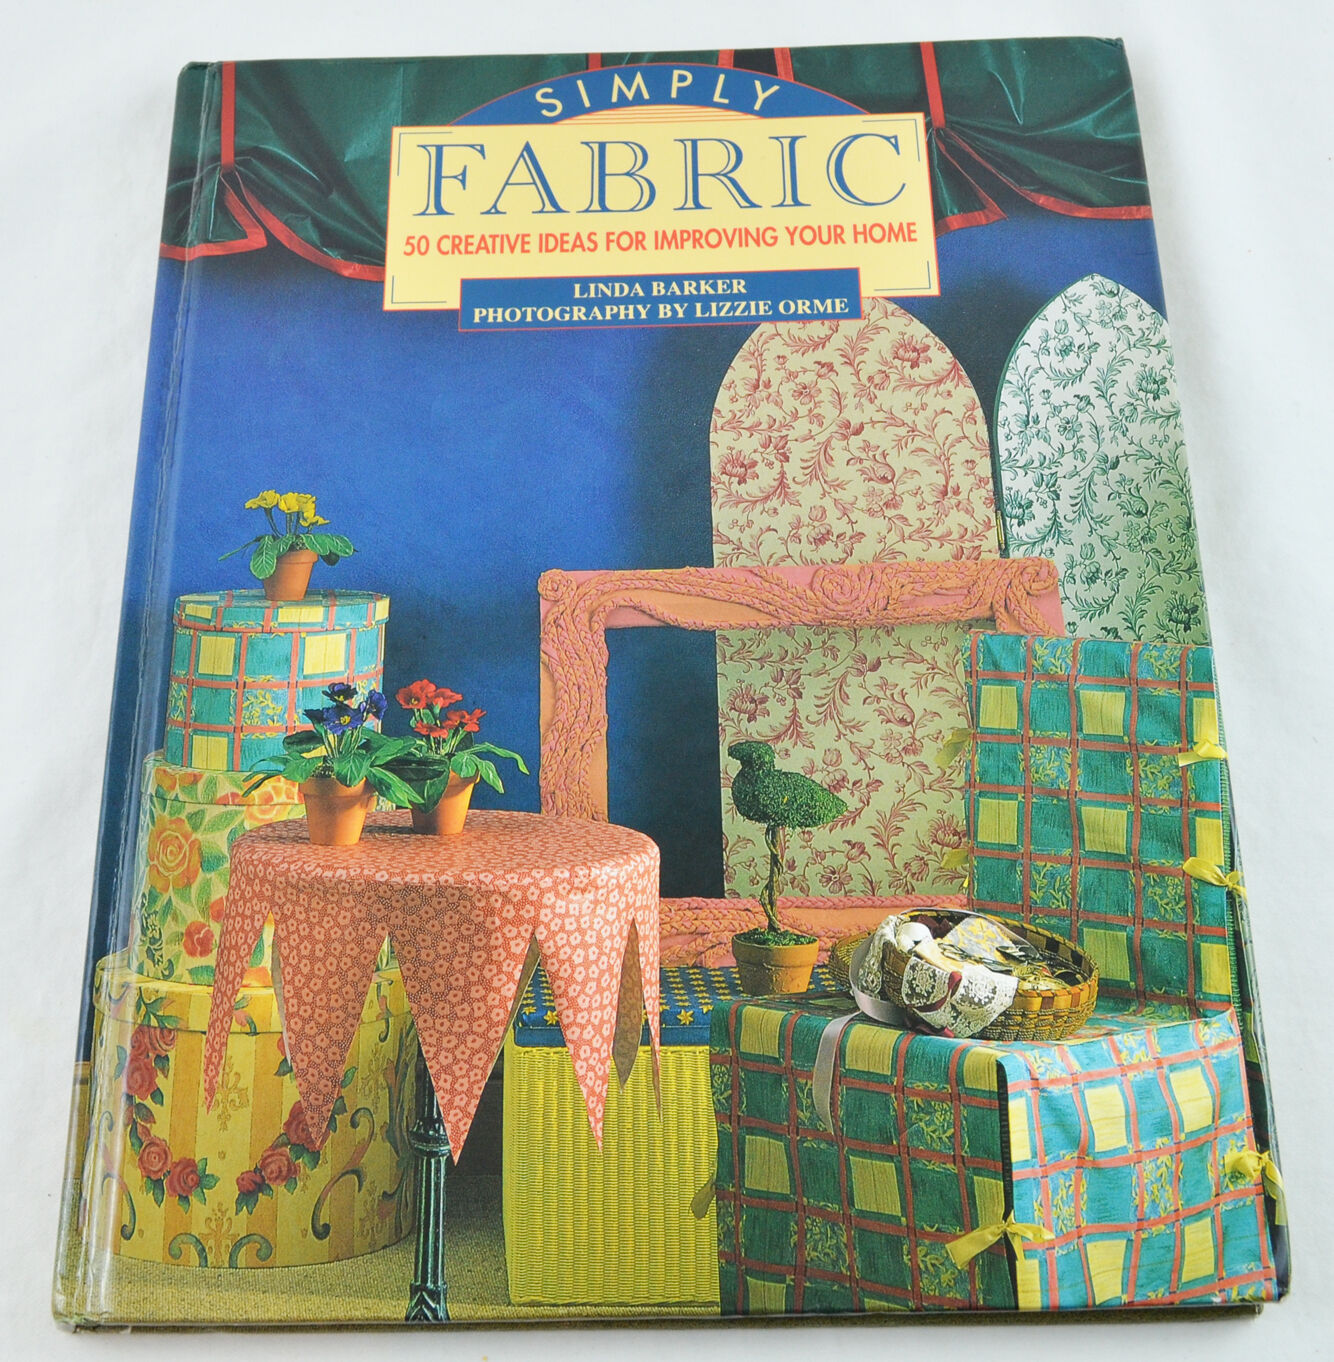 Simply Fabric 50 Creative Ideas For Improving Your Home by Linda Barker (1994)